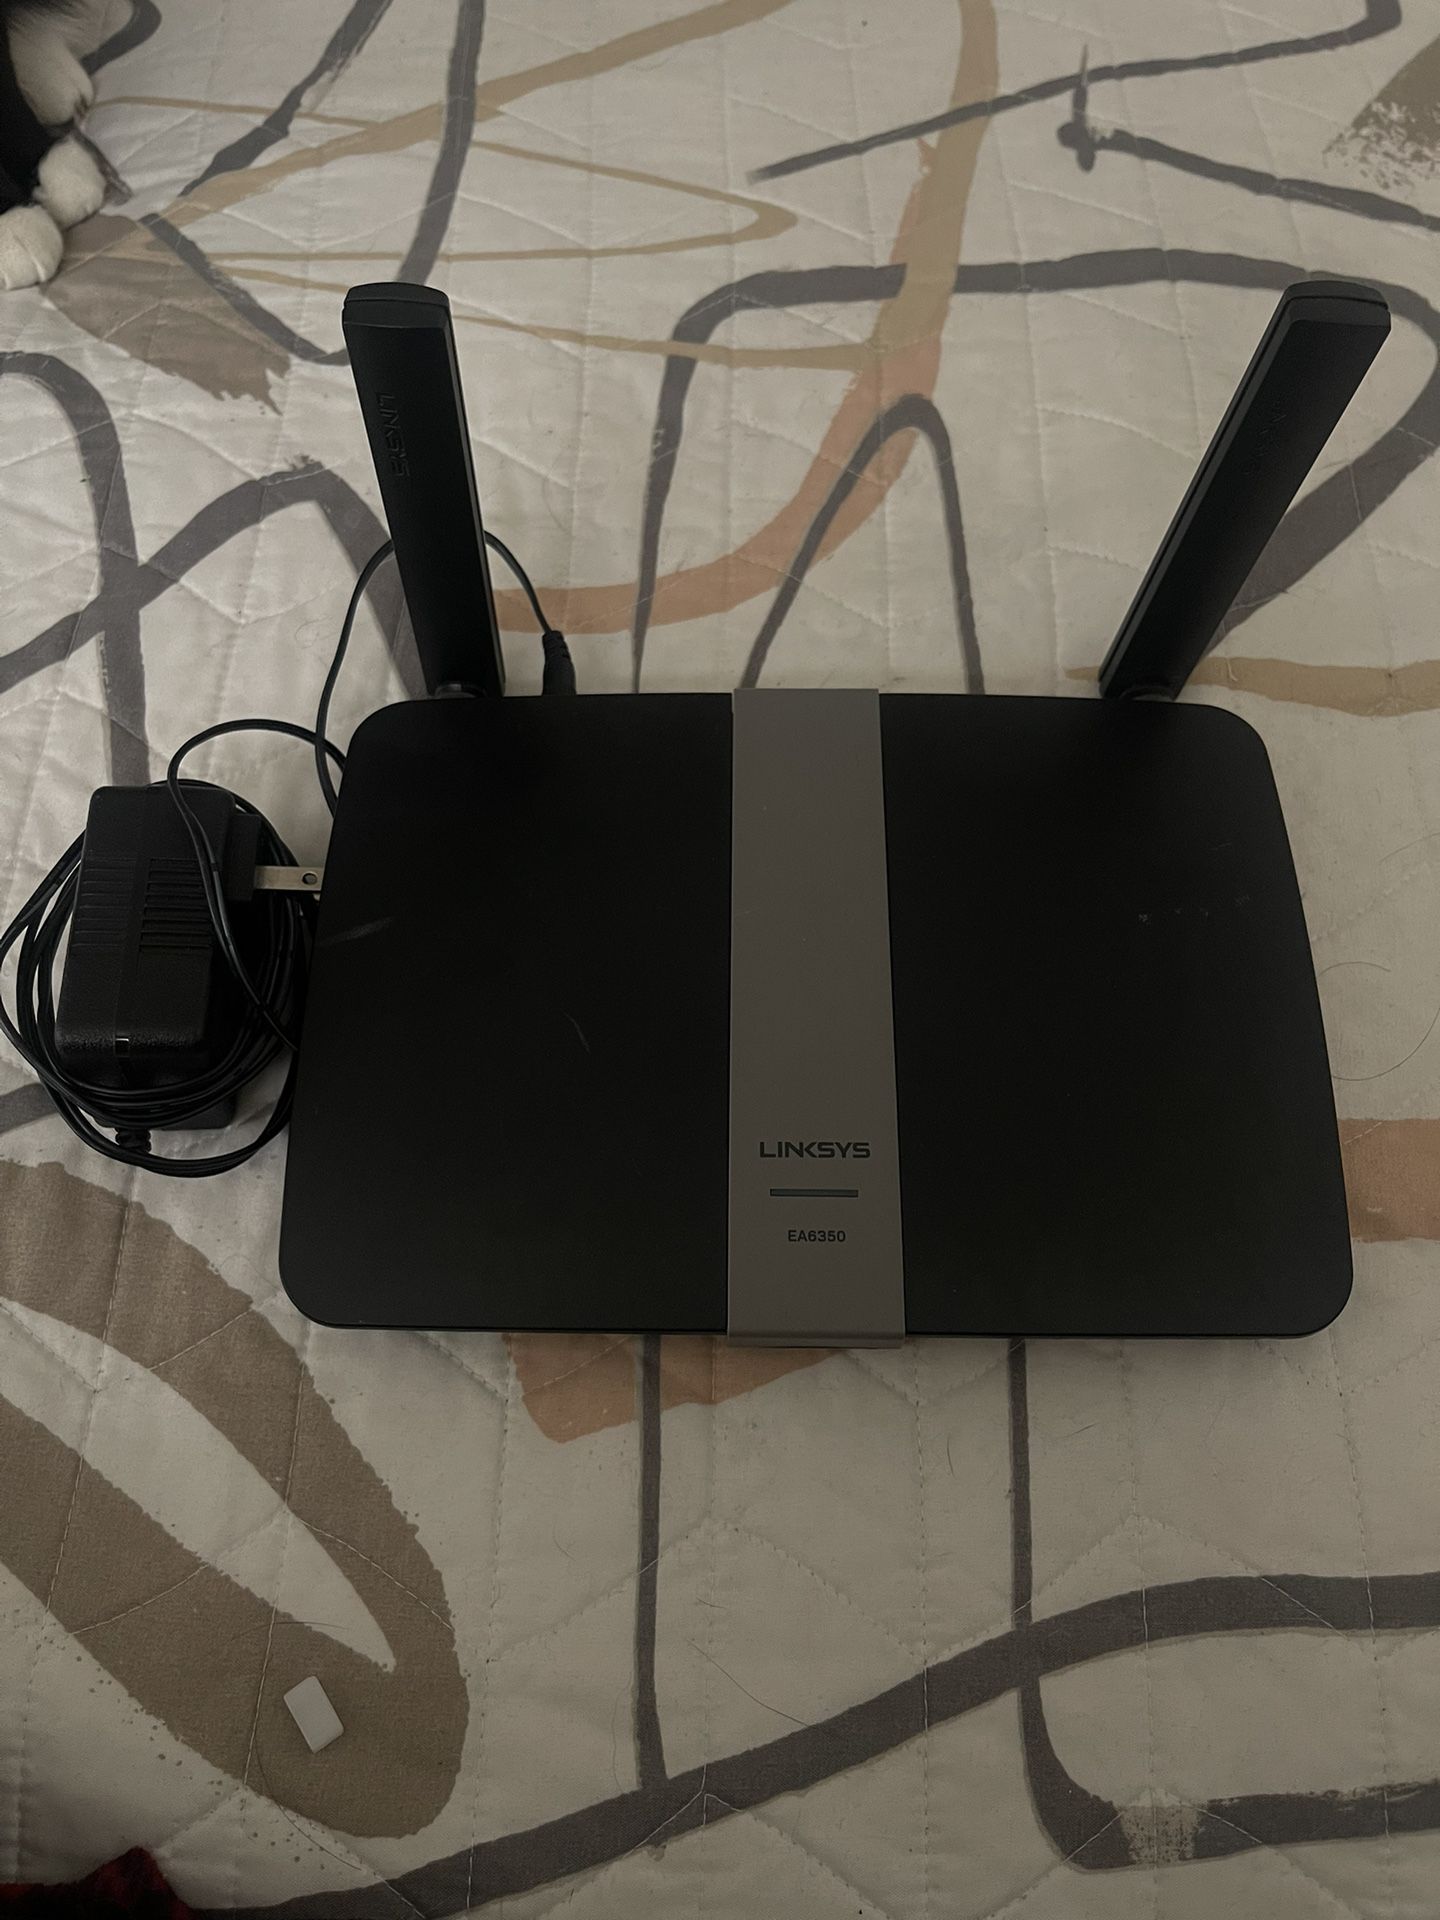 Linksys EA6350 Router.